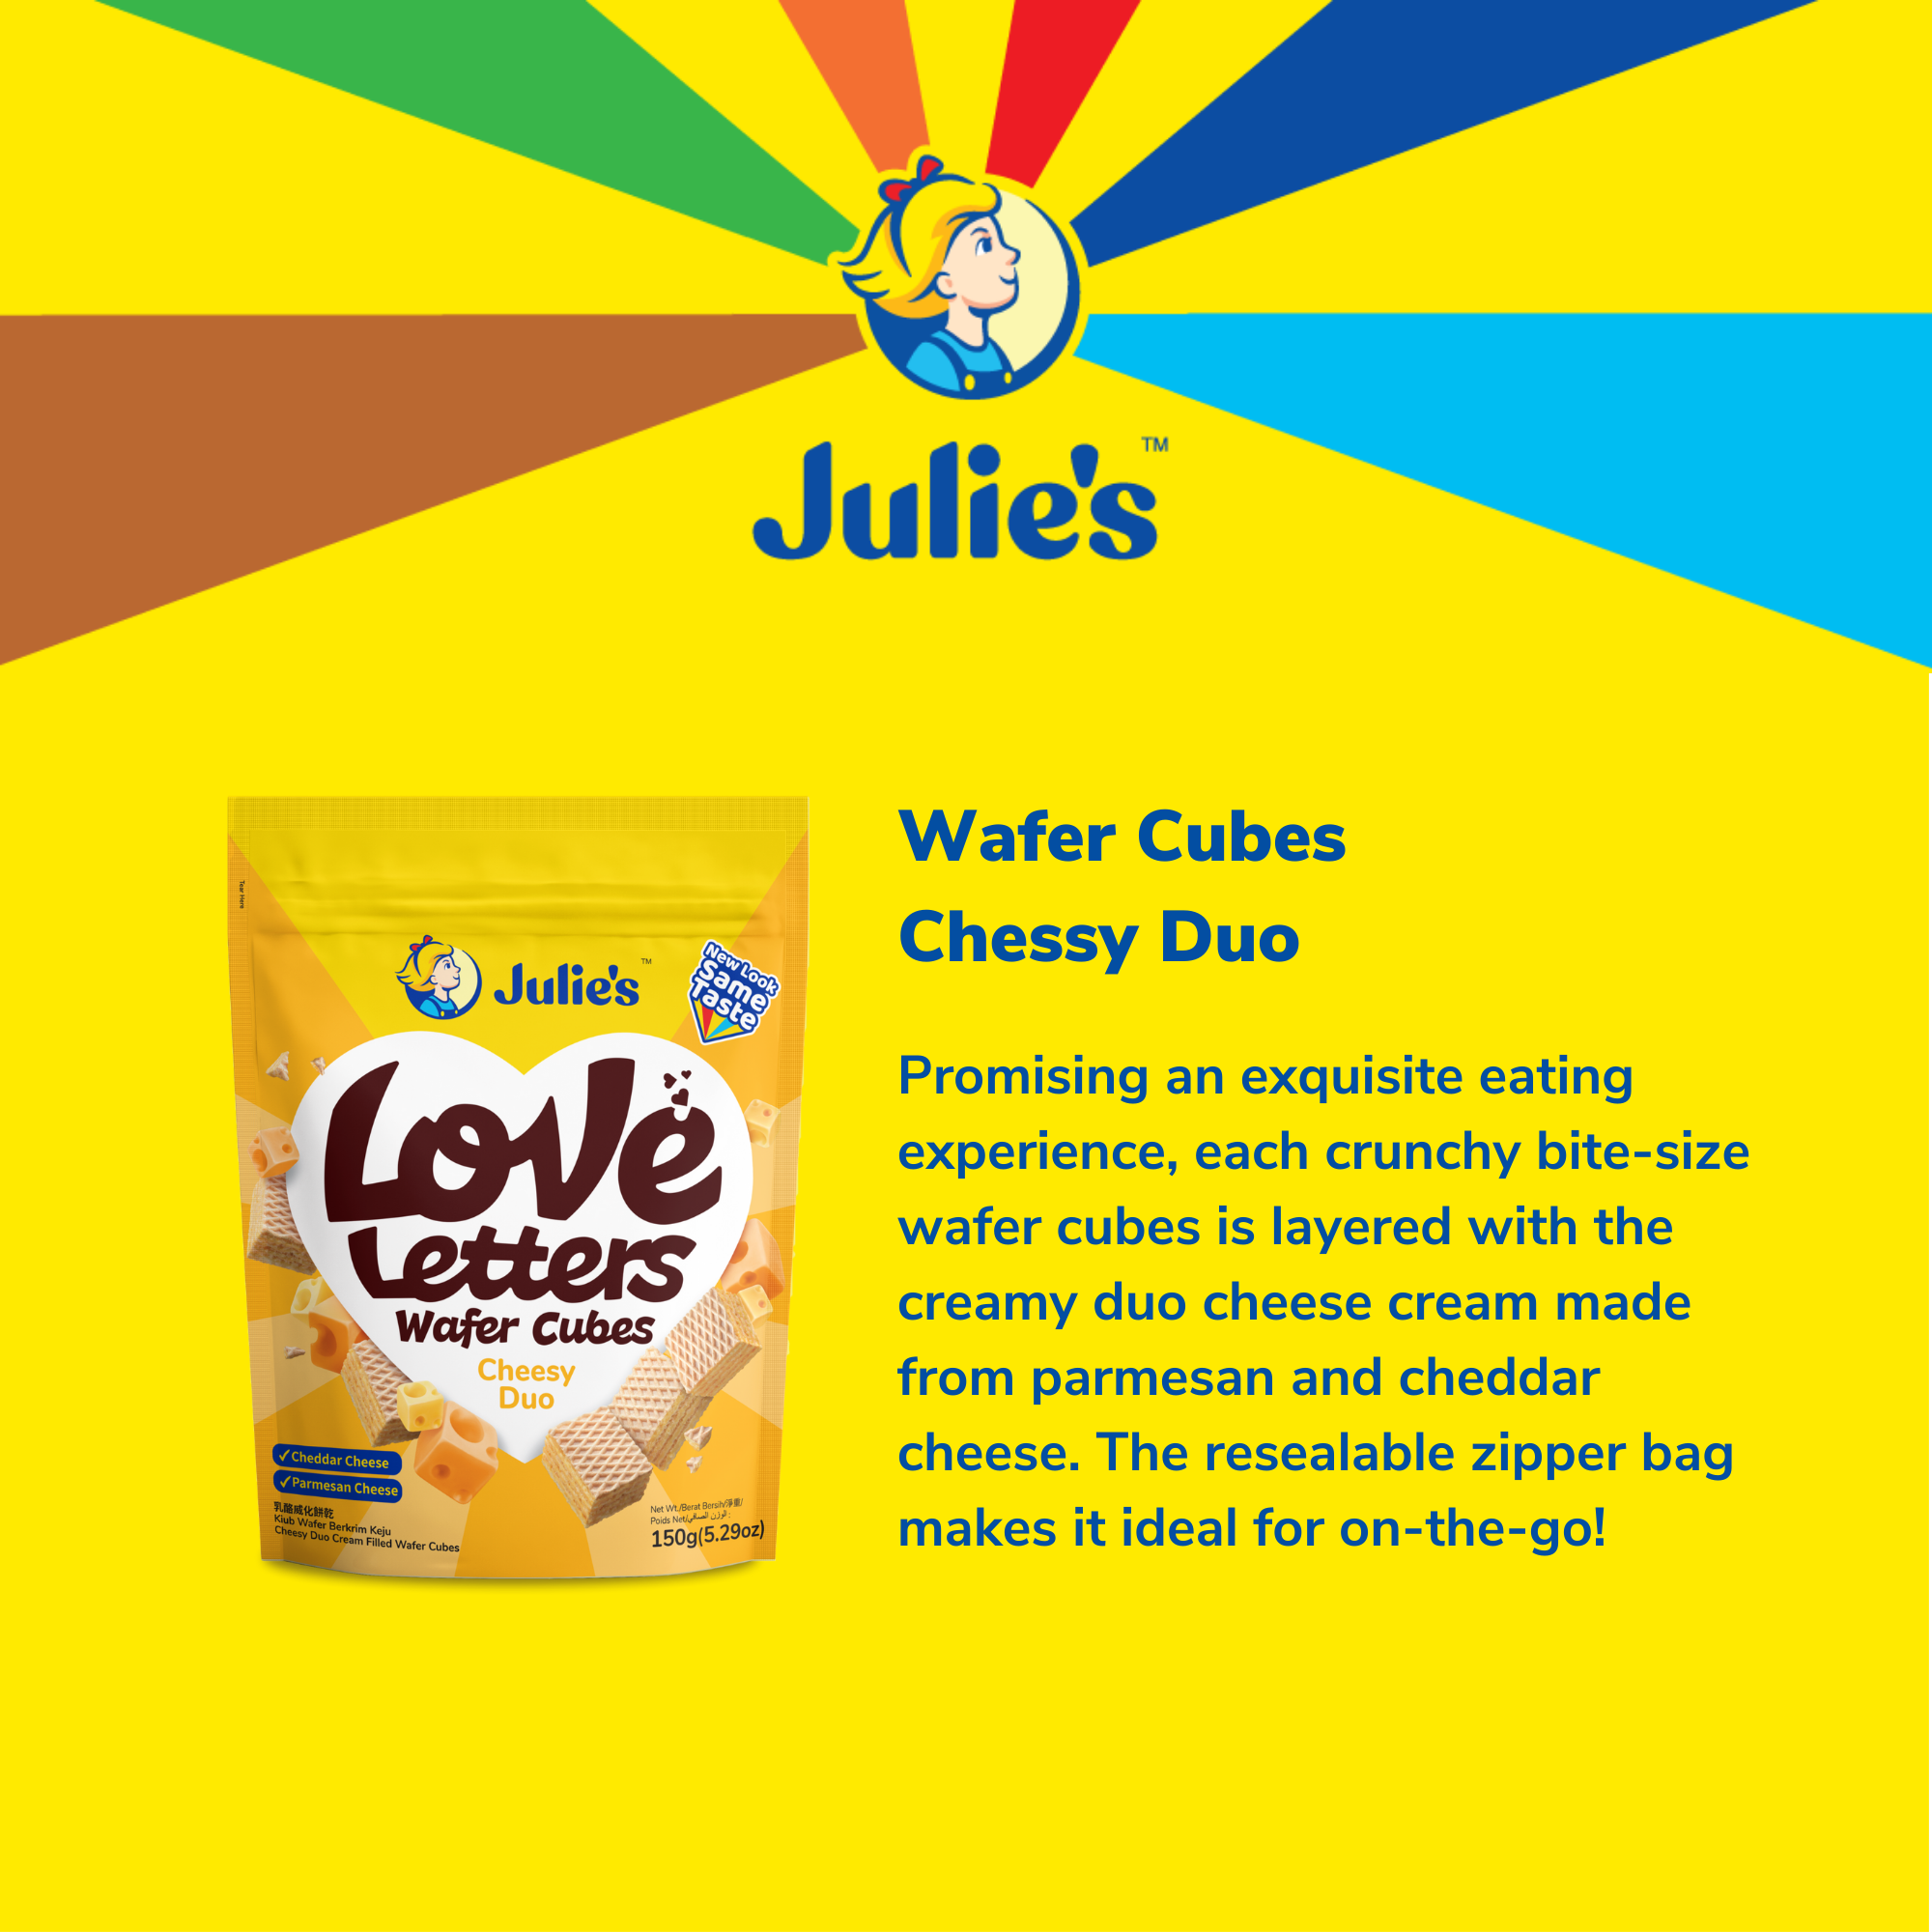 Julie's Love Letters Wafer Cubes Cheesy Duo 150g x 6 packs